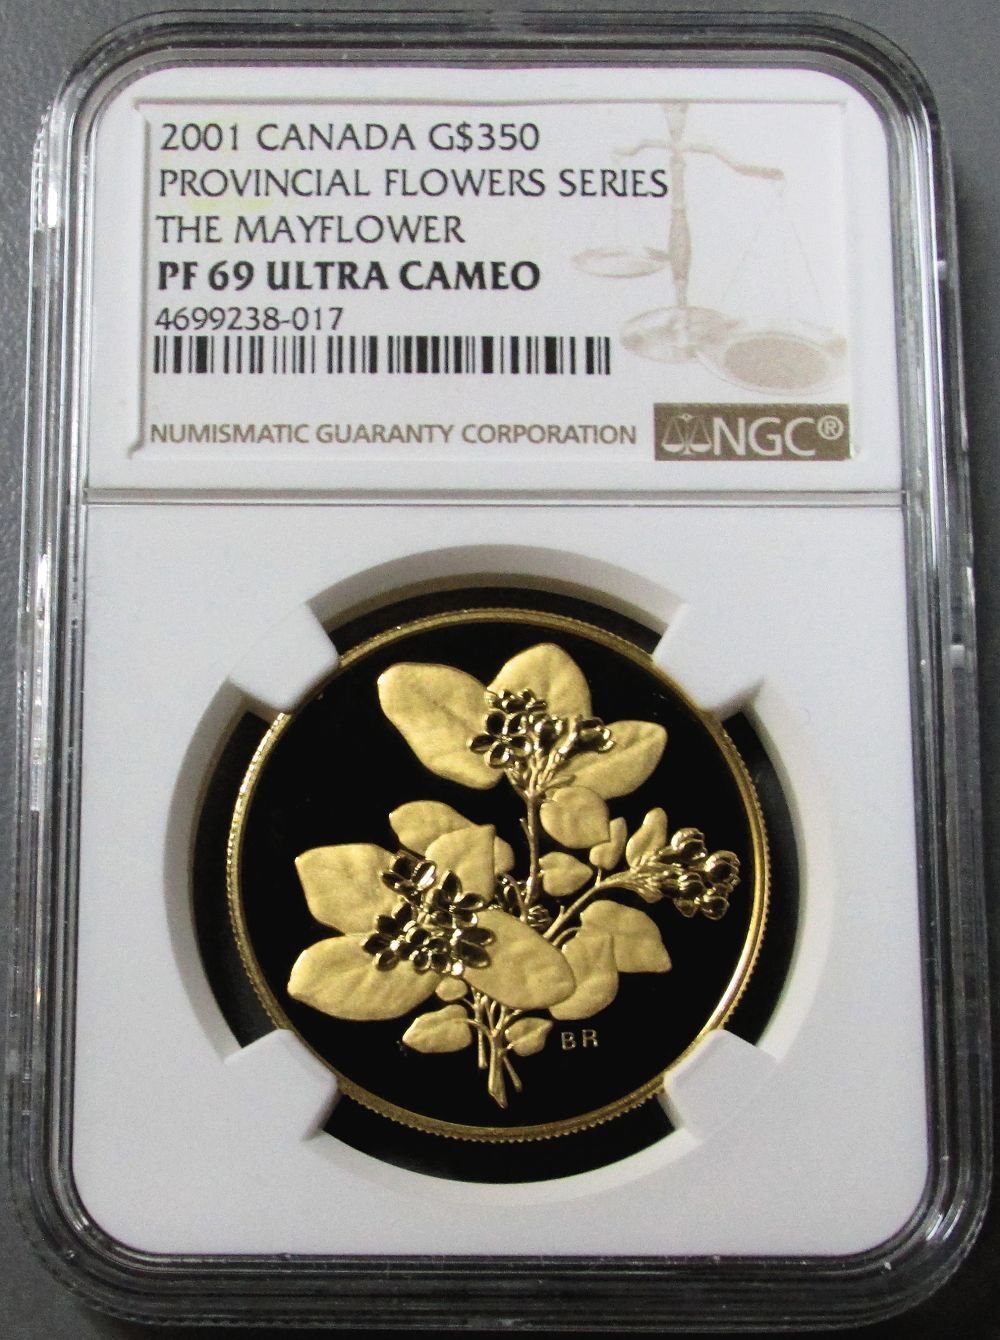 2001 GOLD CANADA $350 NGC PROOF 69 ULTRA CAMEO "FLOWERS OF CANADA SERIES - THE MAYFLOWER" ONLY 1,988 MINTED!